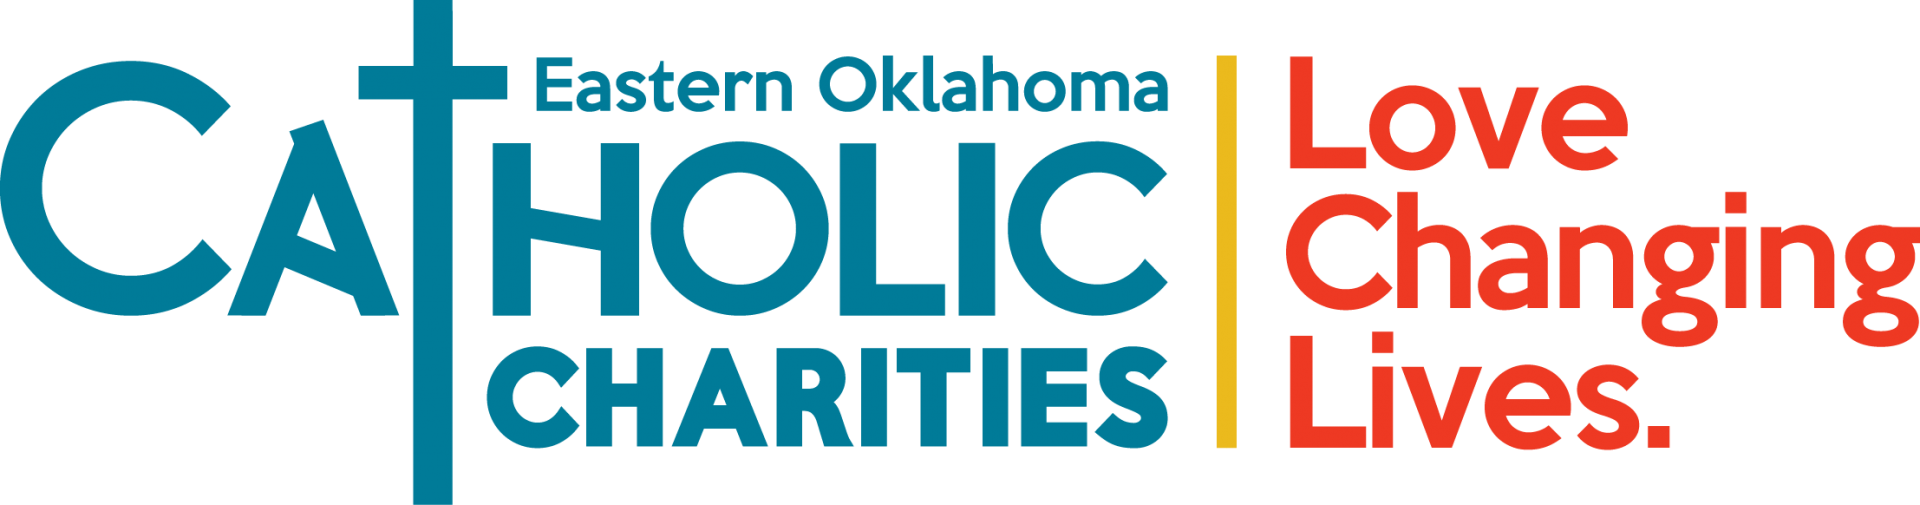 Catholic Charities of Eastern Oklahoma, including the tag line love changing lives